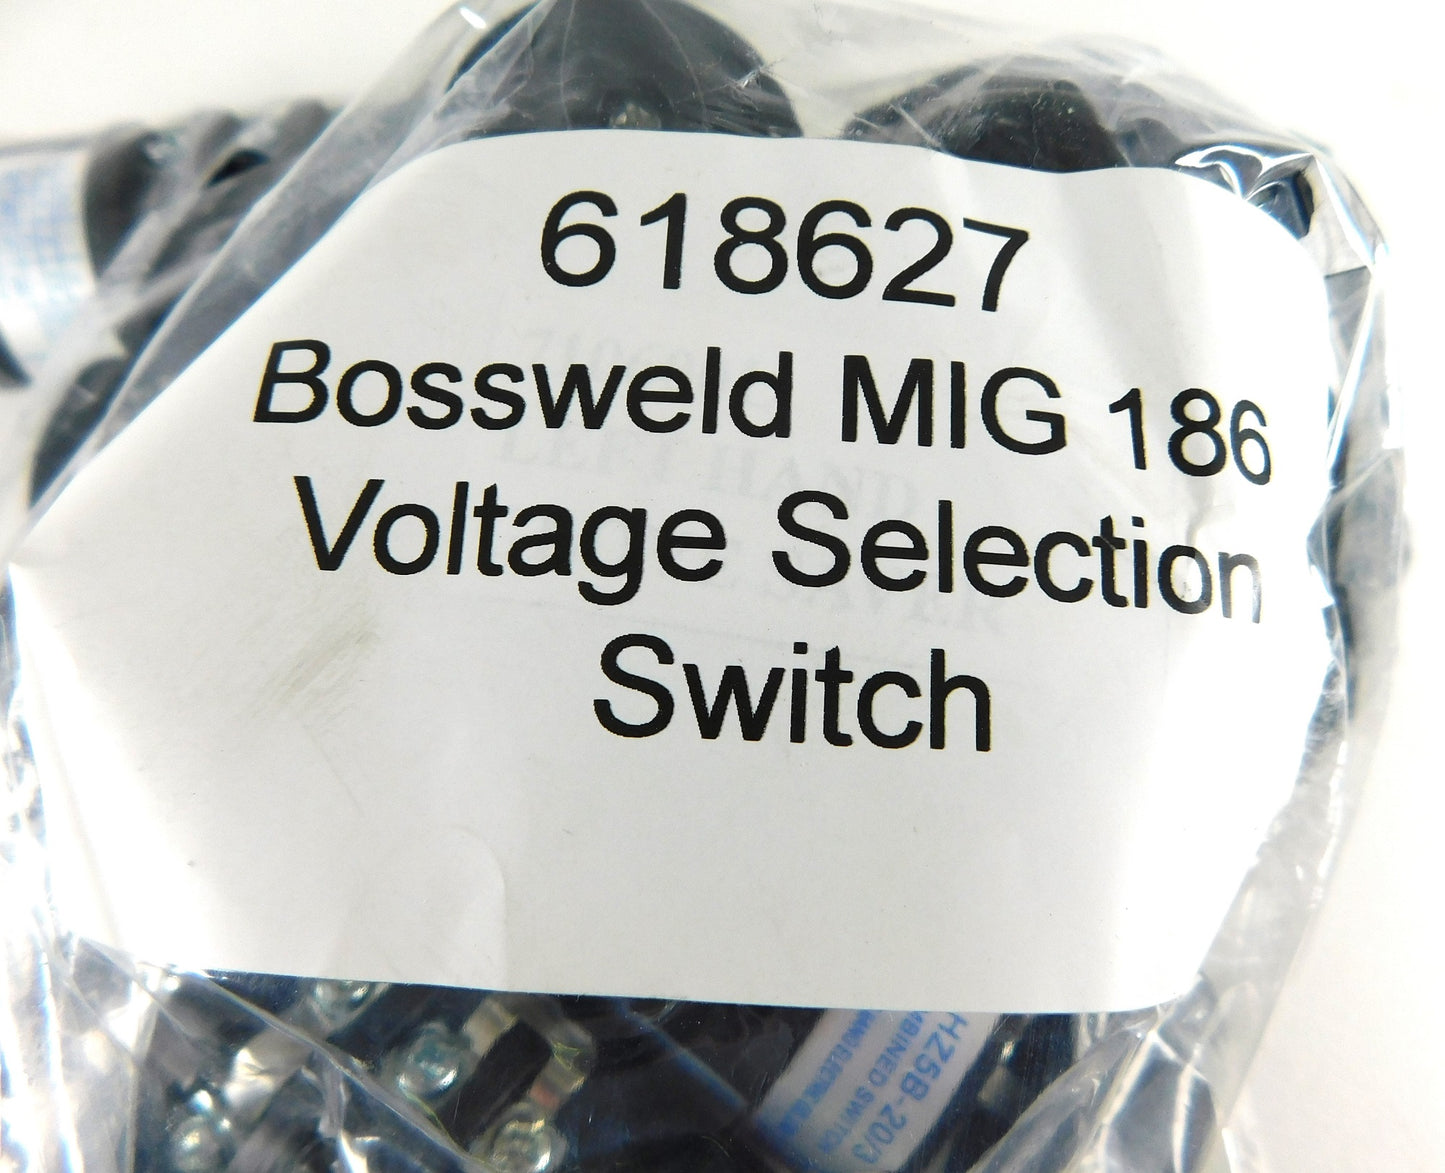 MIG186 Bossweld Voltage Selection Switch  618627